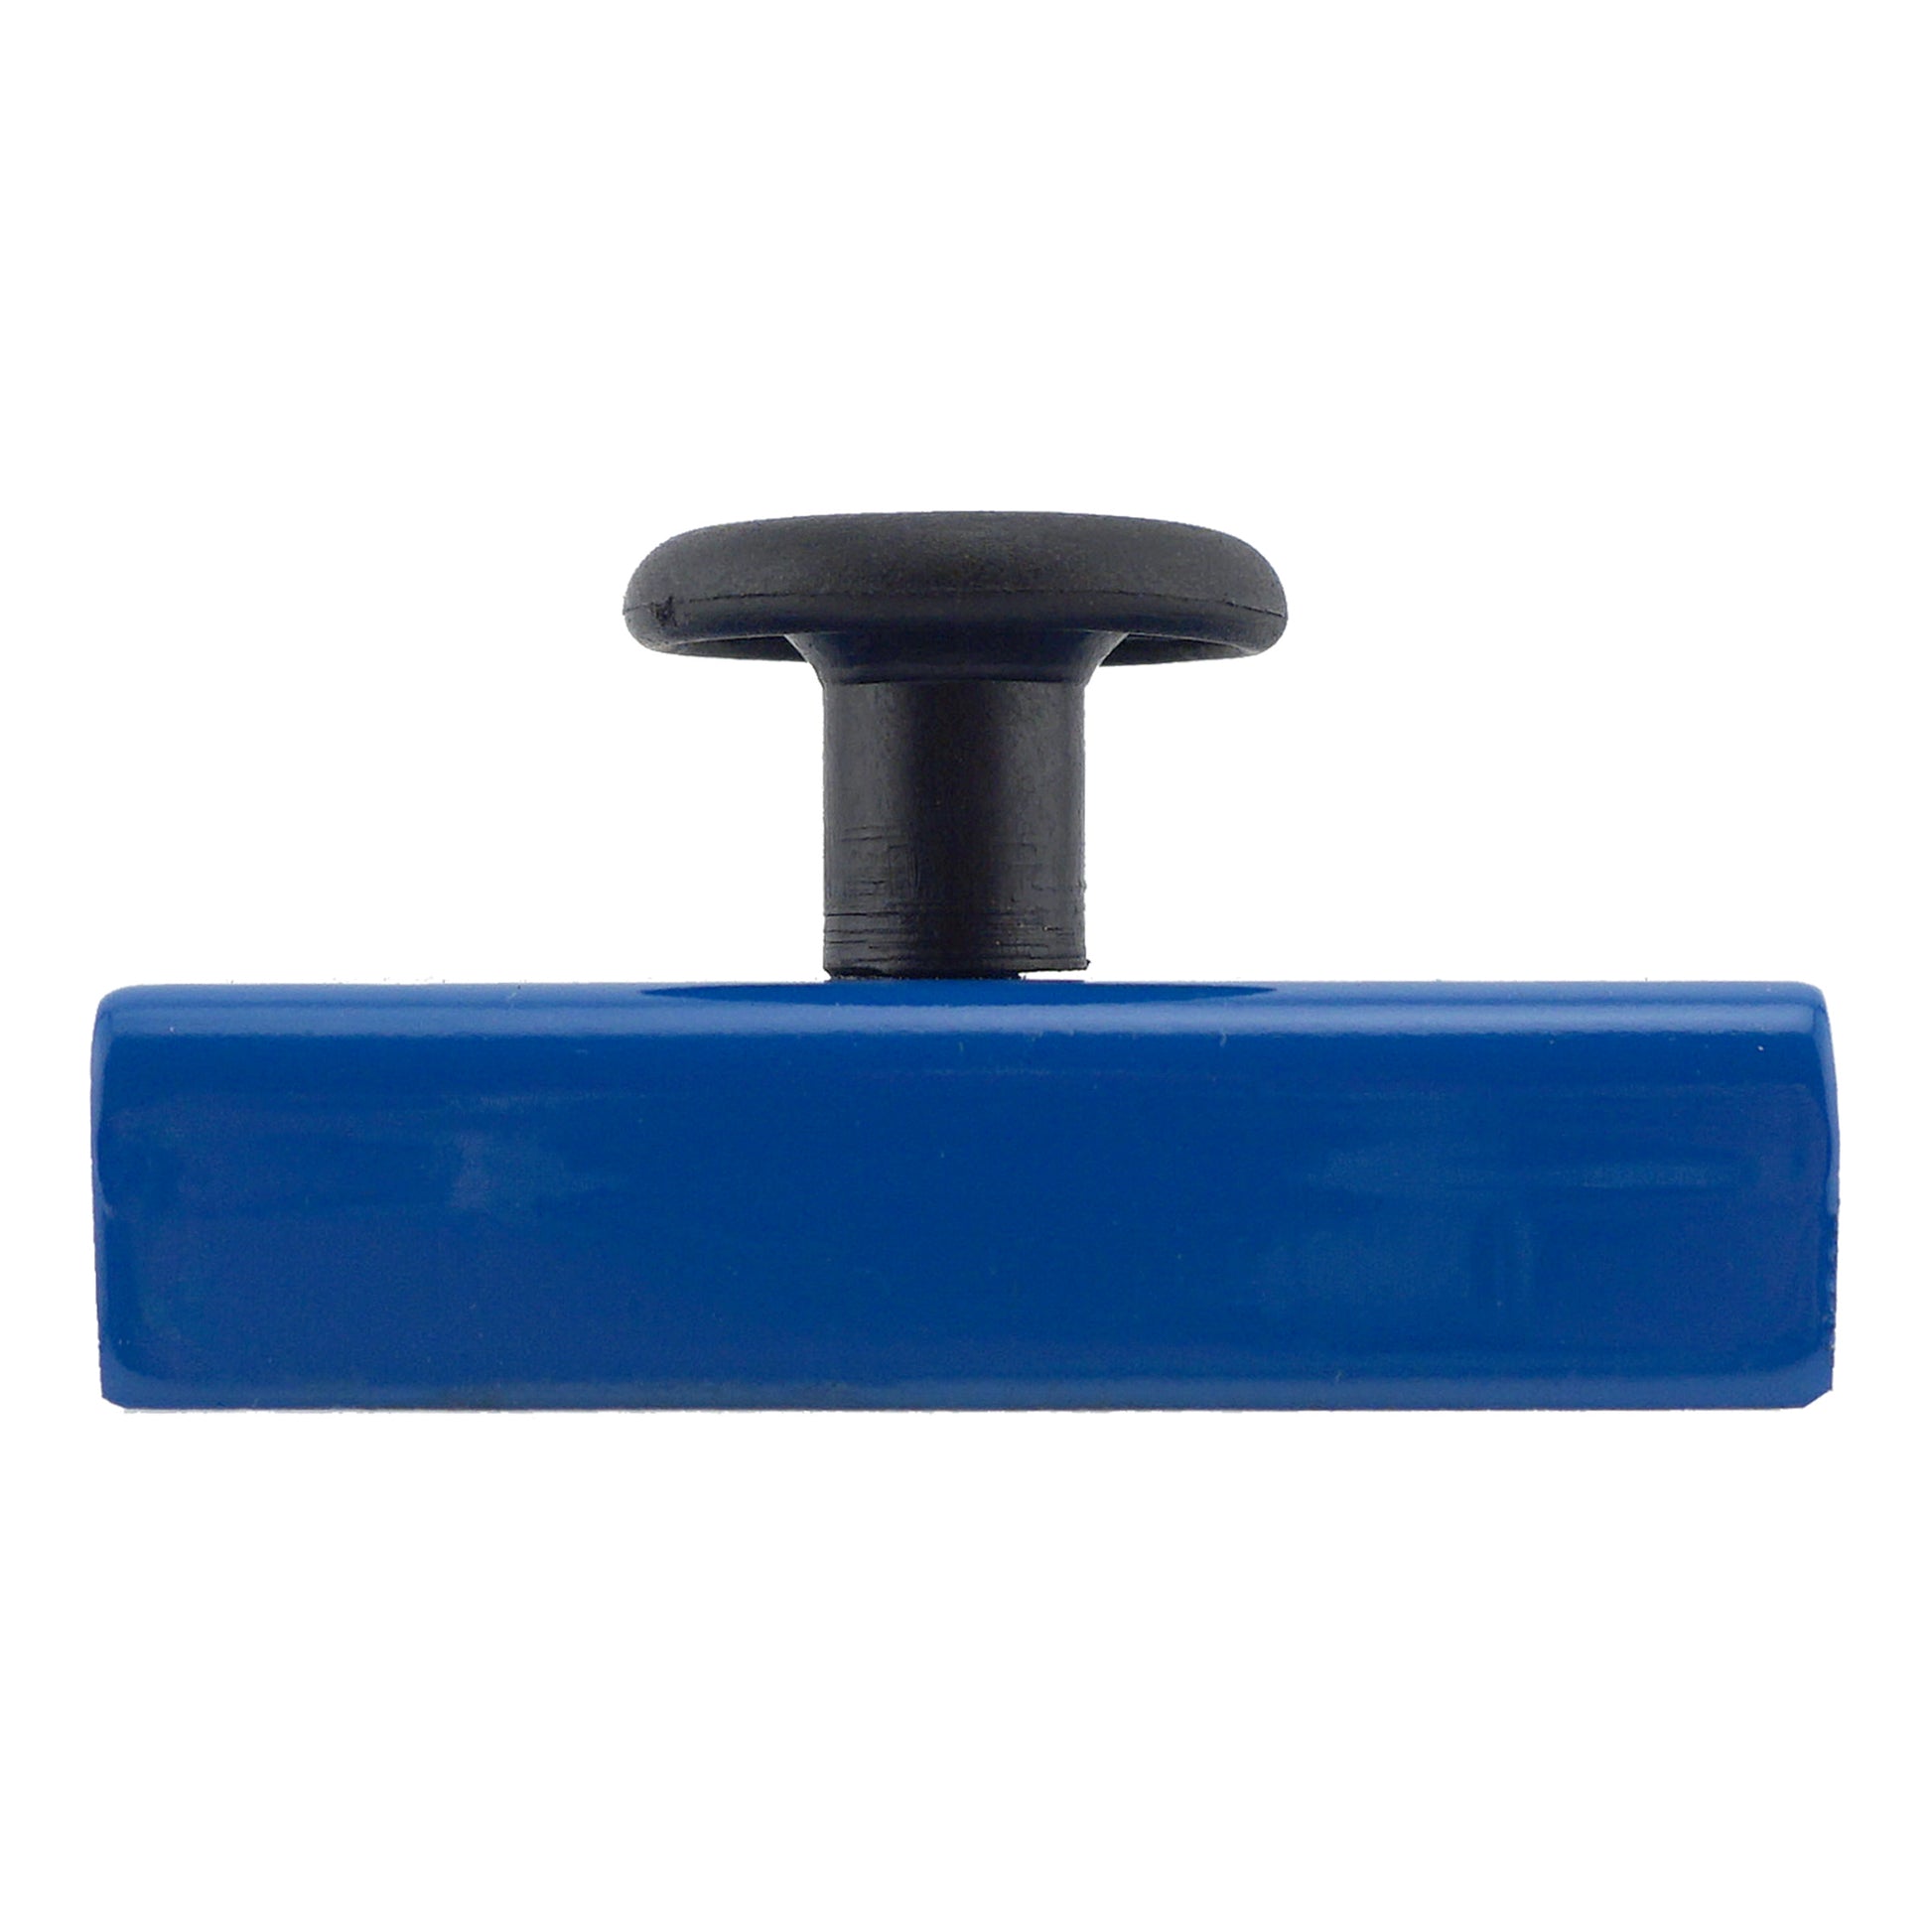 Load image into Gallery viewer, HMKS-A Ceramic Rectangular Base Magnet with Knob - Front View